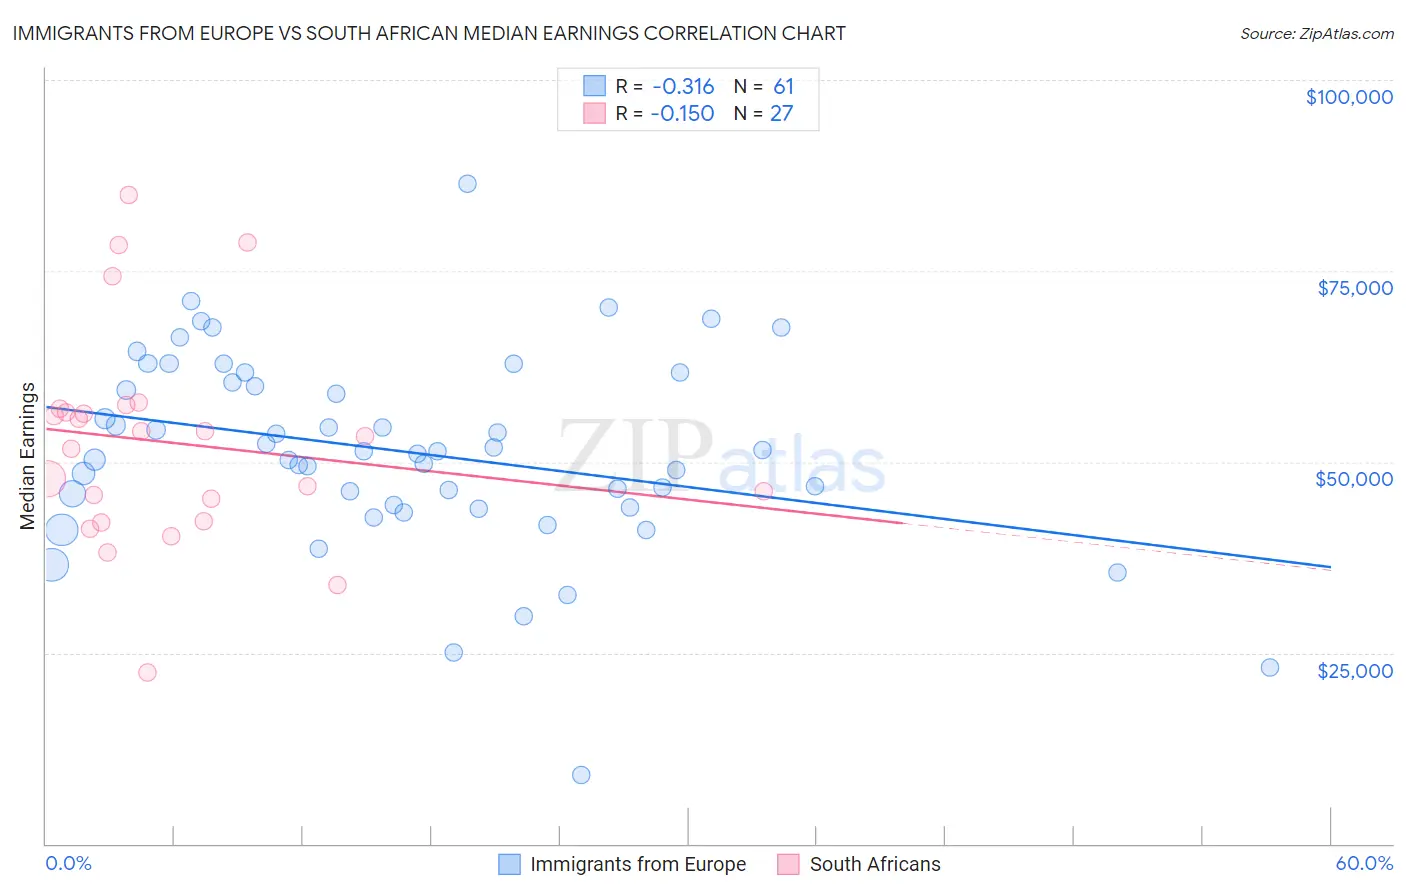 Immigrants from Europe vs South African Median Earnings